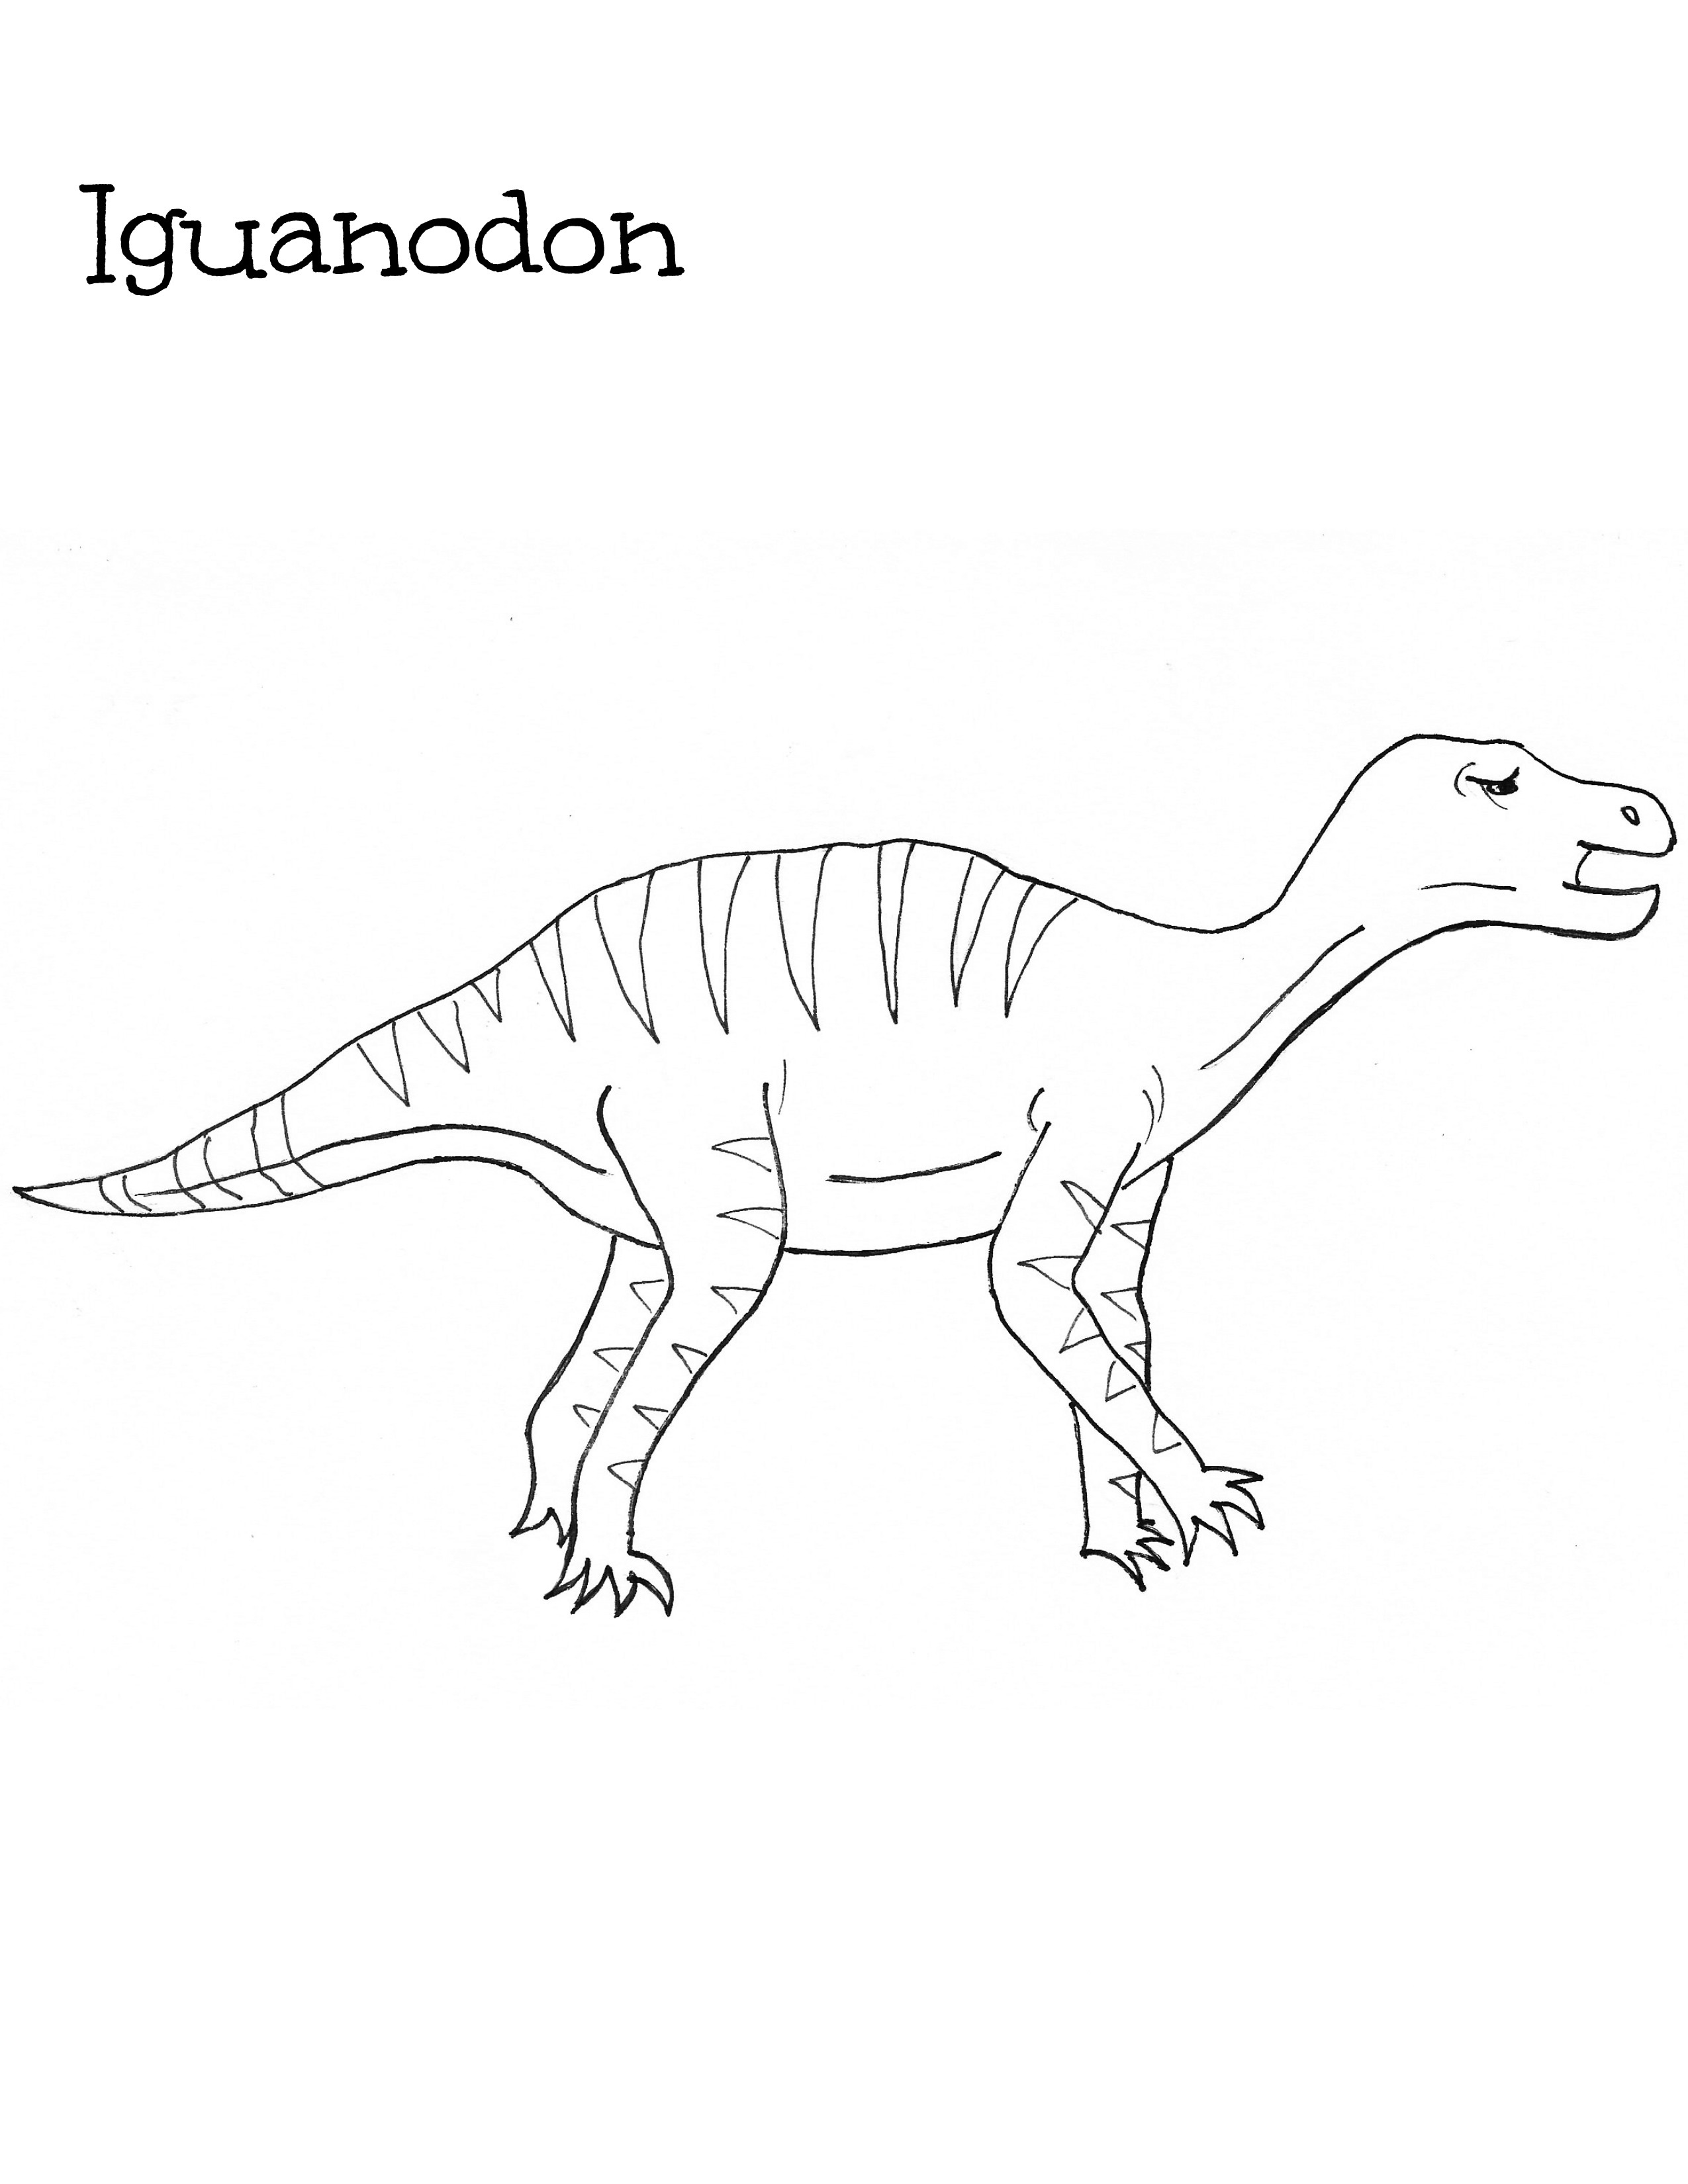 iguanodon coloring pages printable